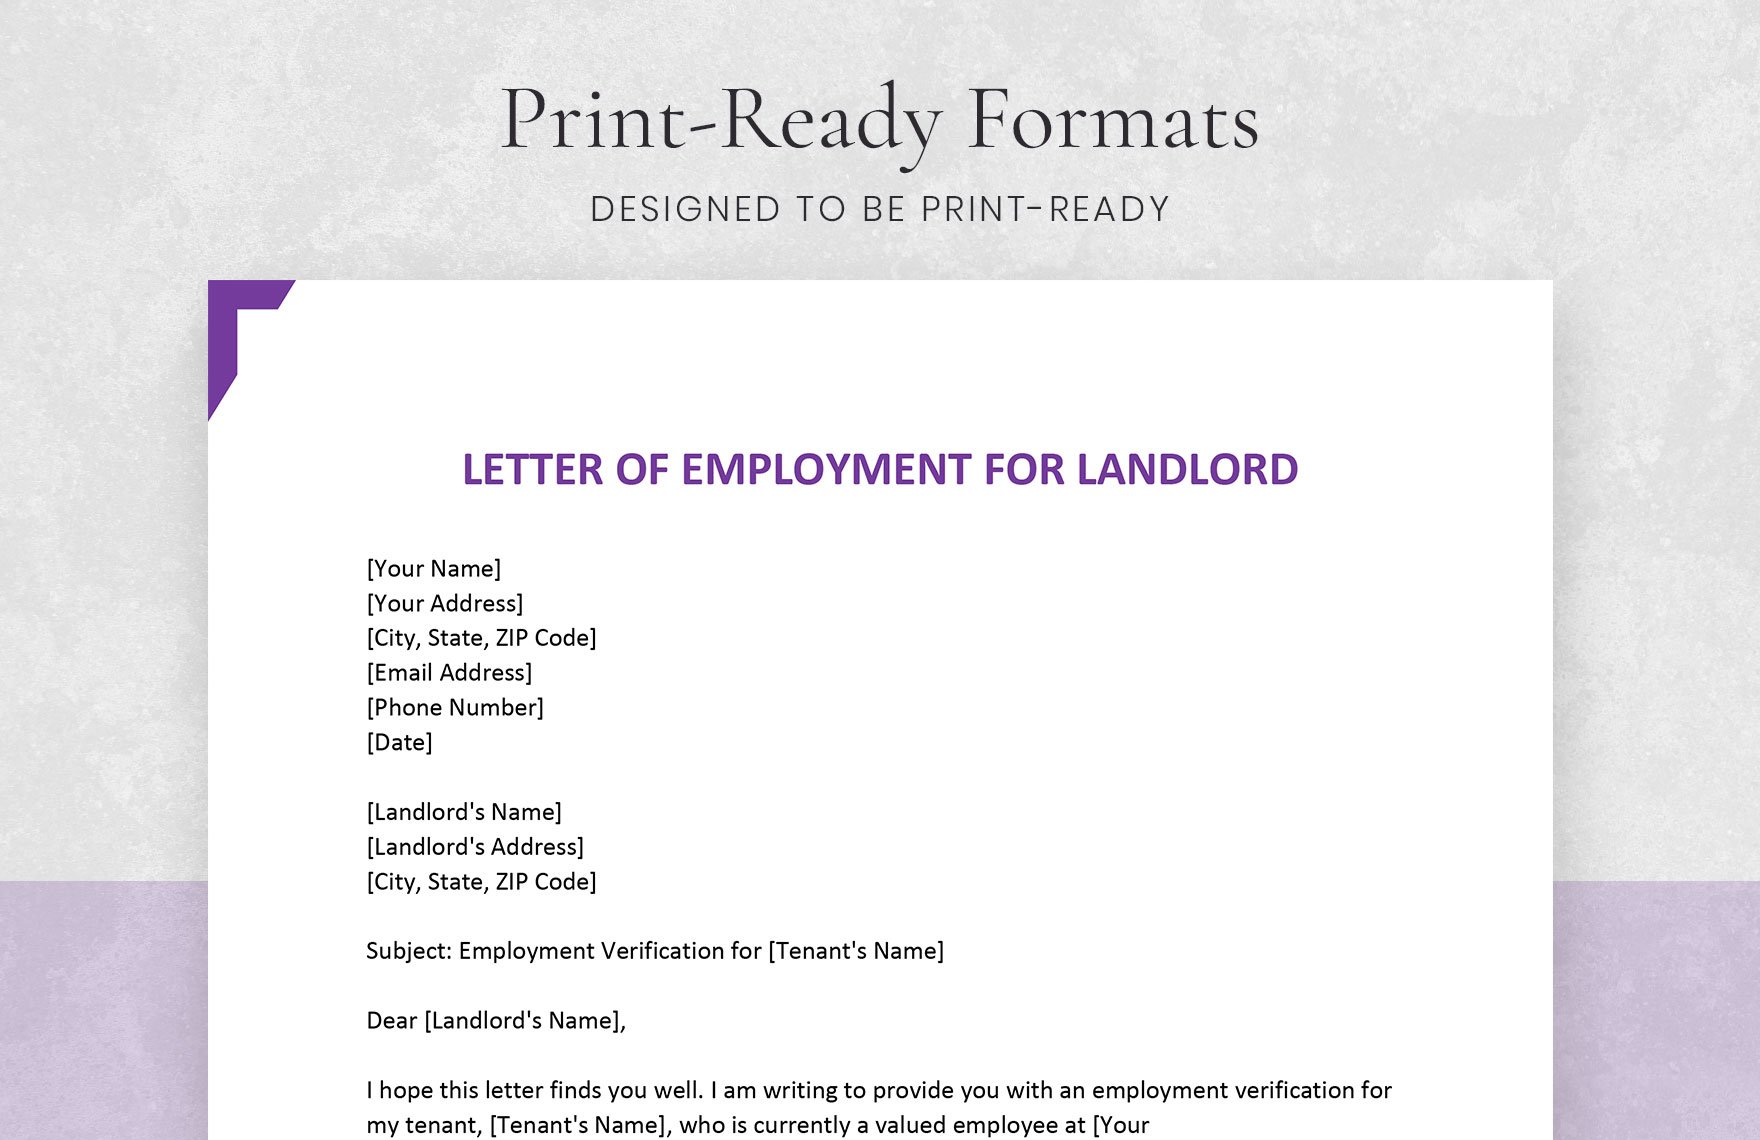 Letter of Employment for Landlord